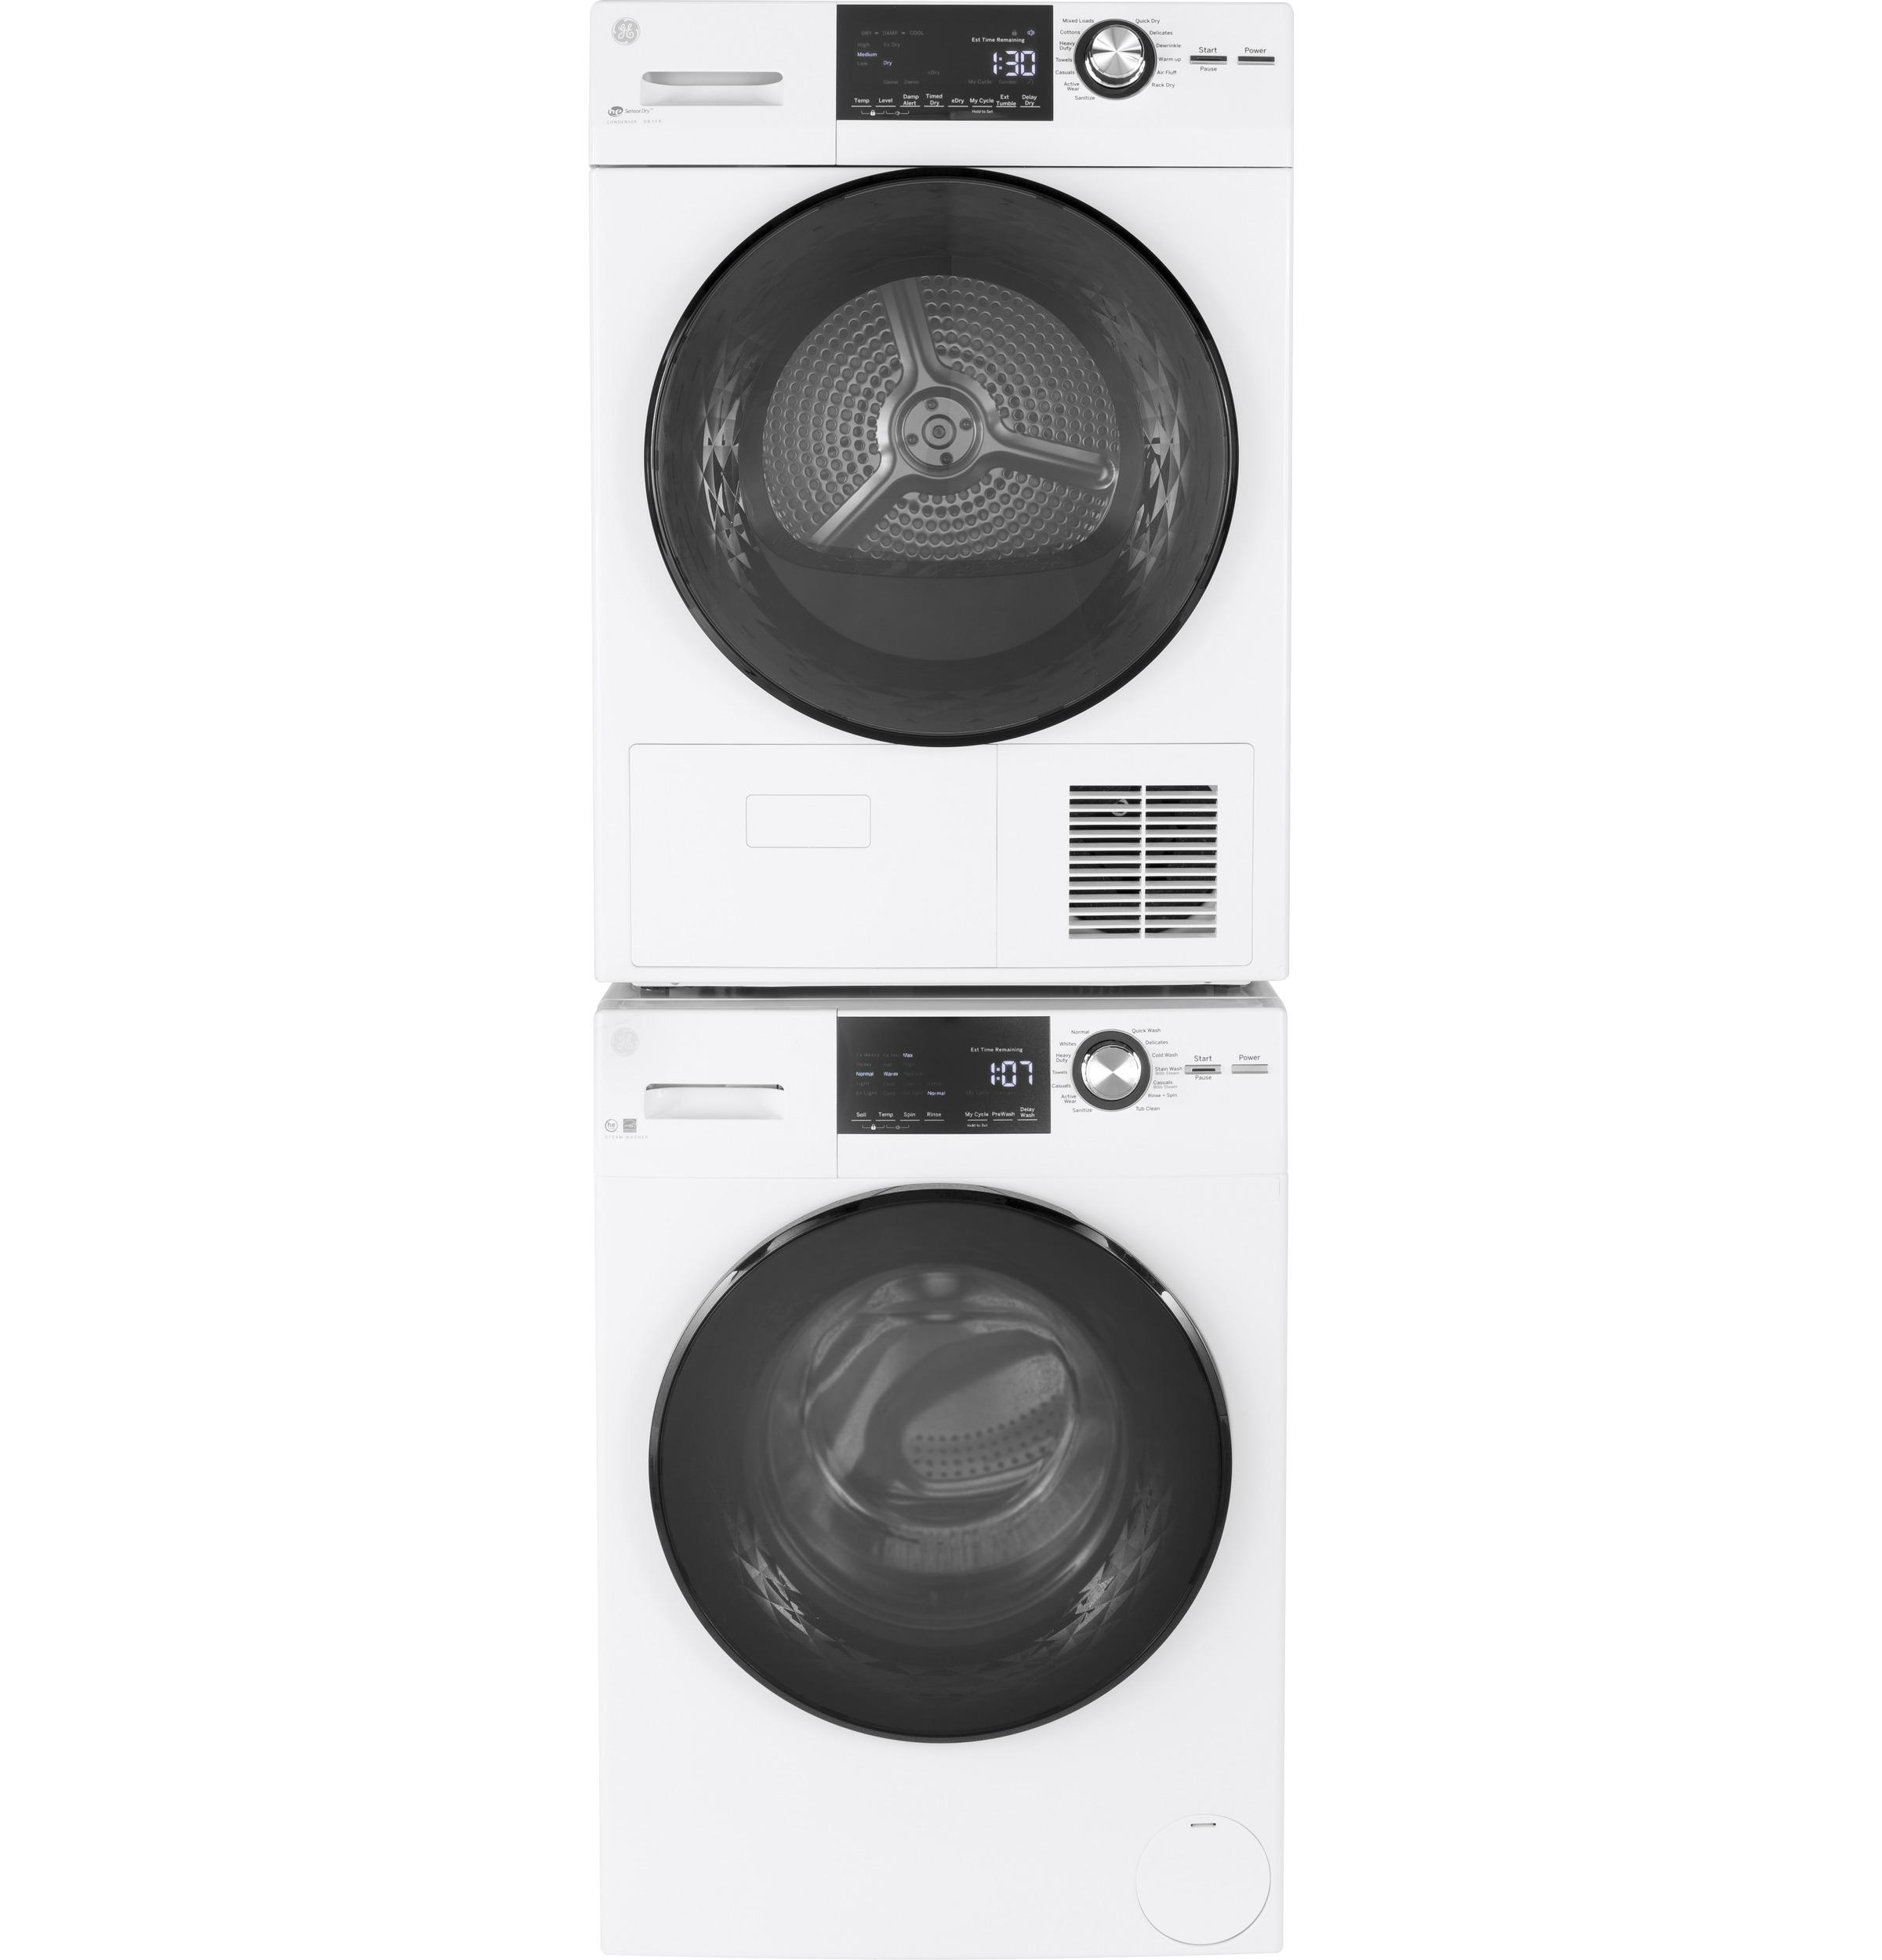 GENERAL ELECTRIC GFW148SSMWW 24 Frontload Washer with Steam 2.4 cu. ft. Capacity Plugs into Dryer or Wall Energy Star Electronic Touch Controls in White - image 3 of 5